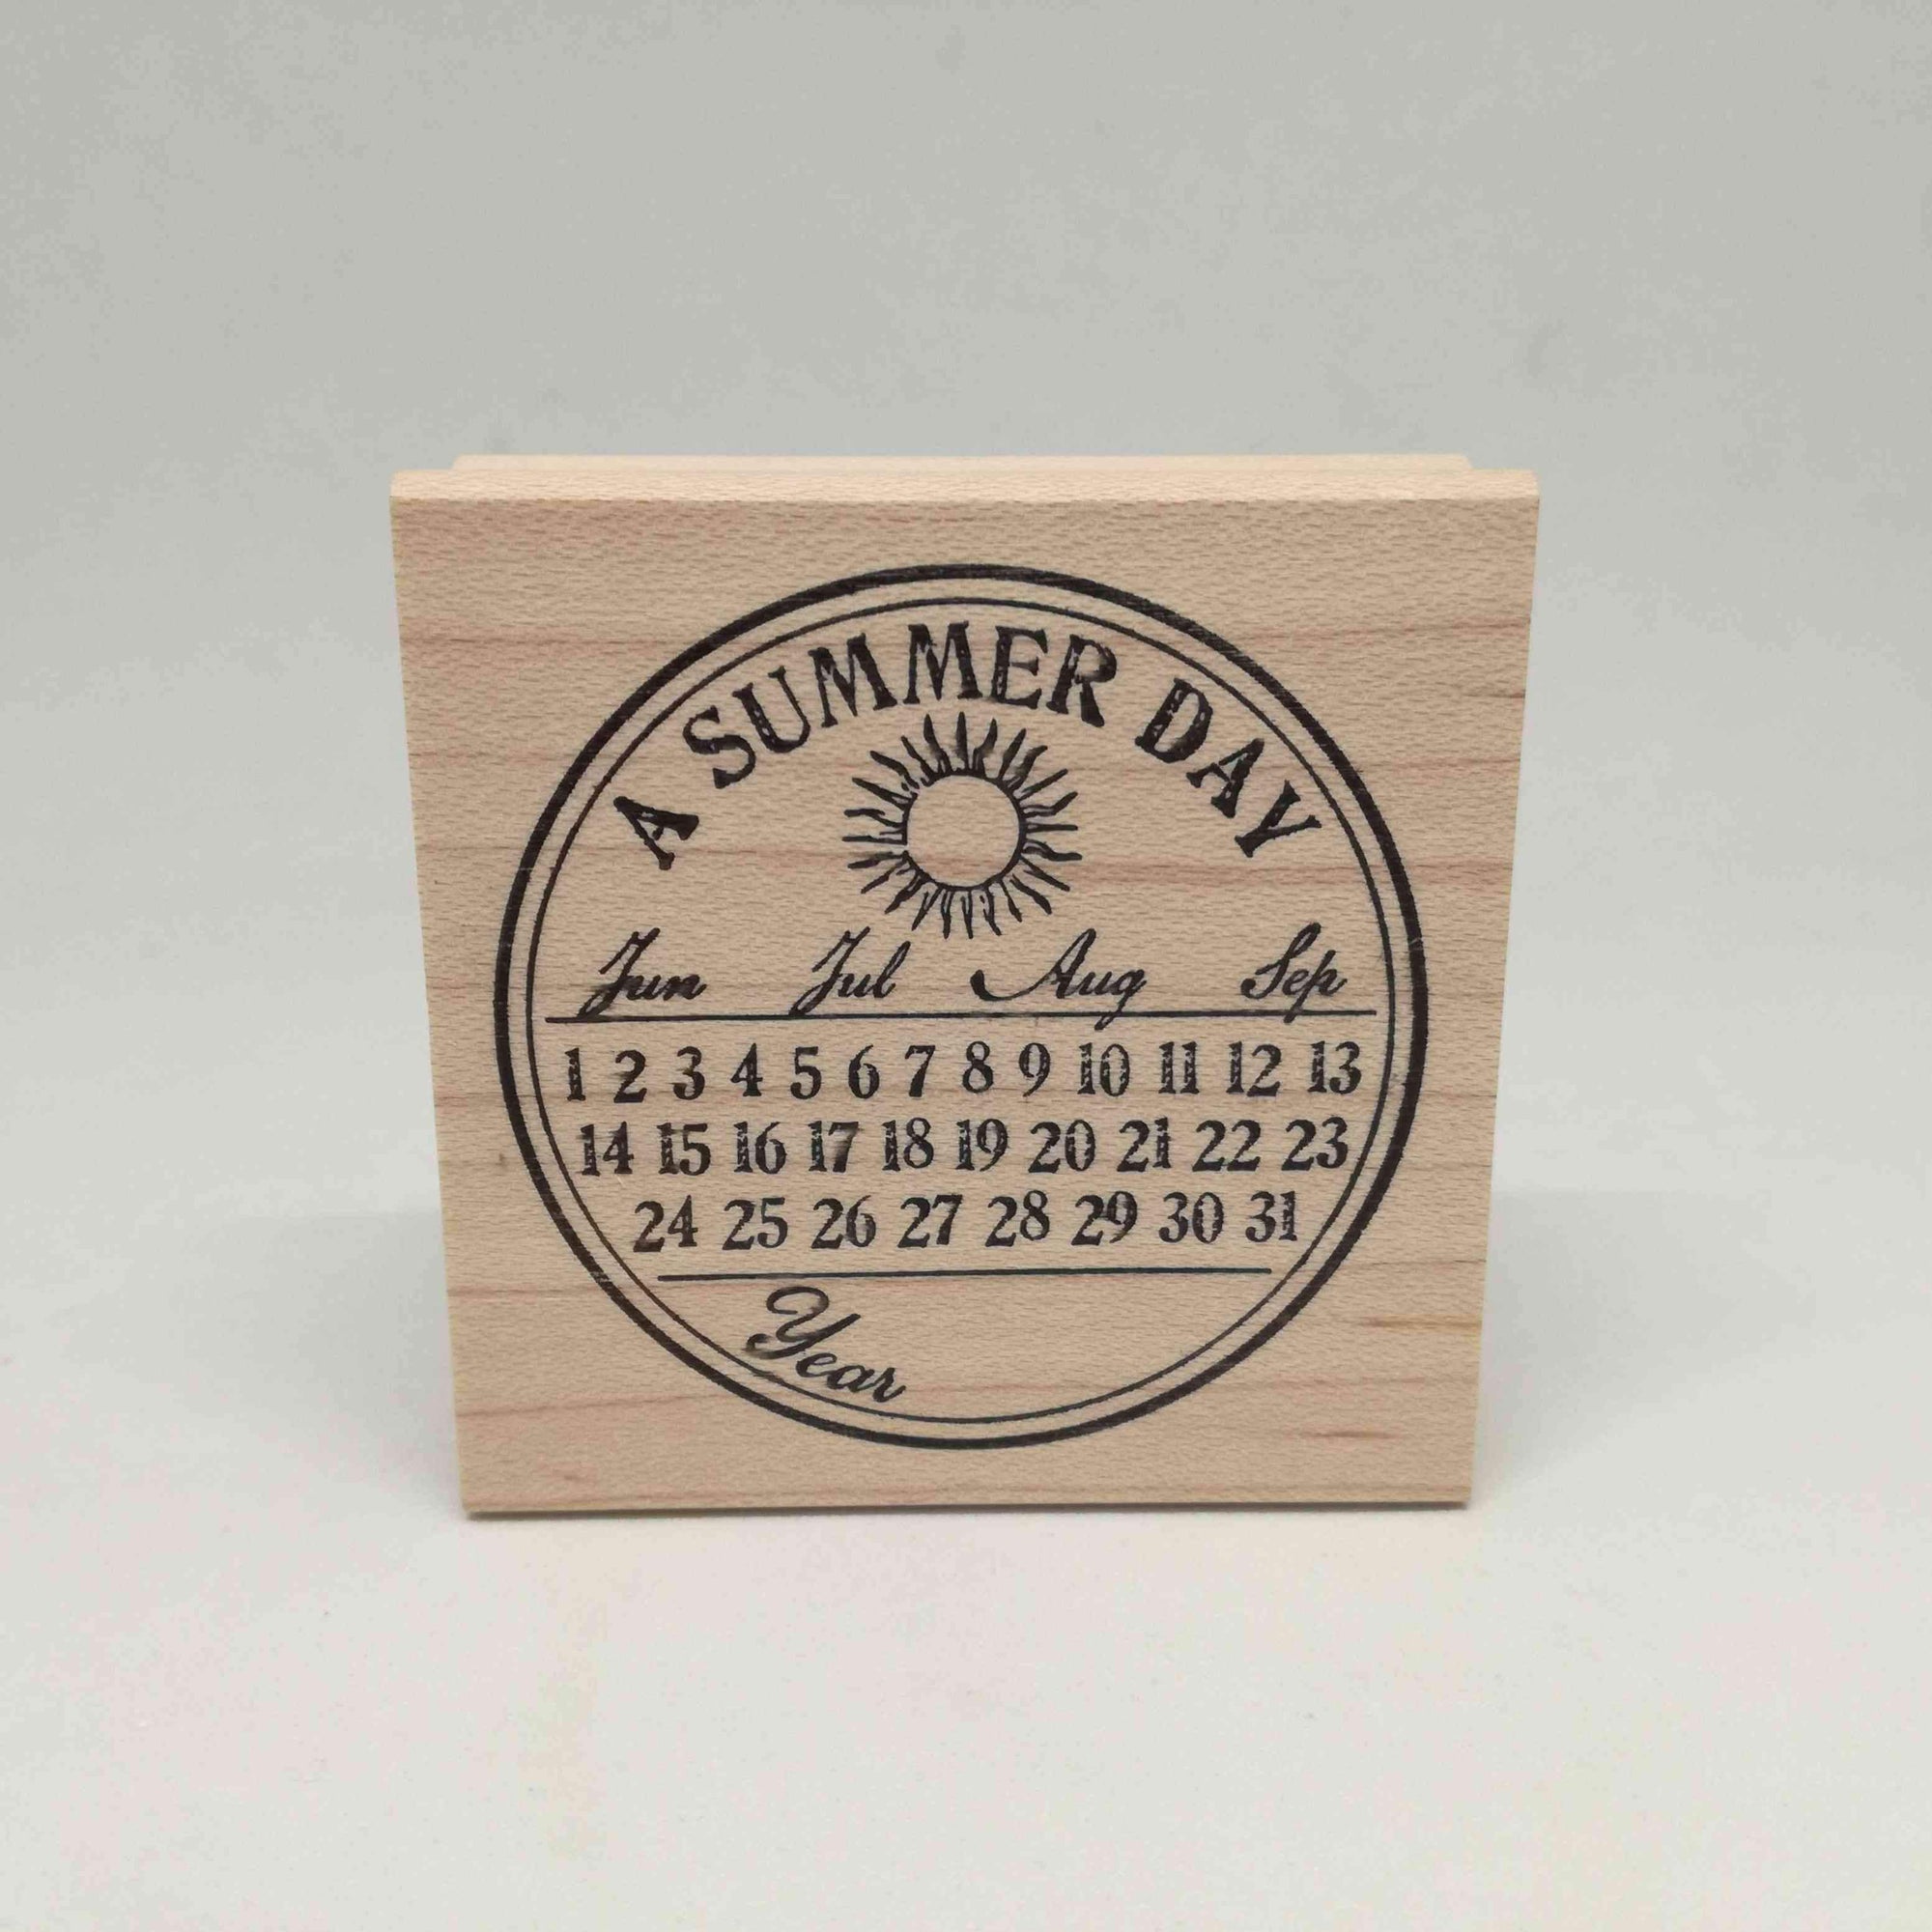 Catslife Press A Summer Day Stamp